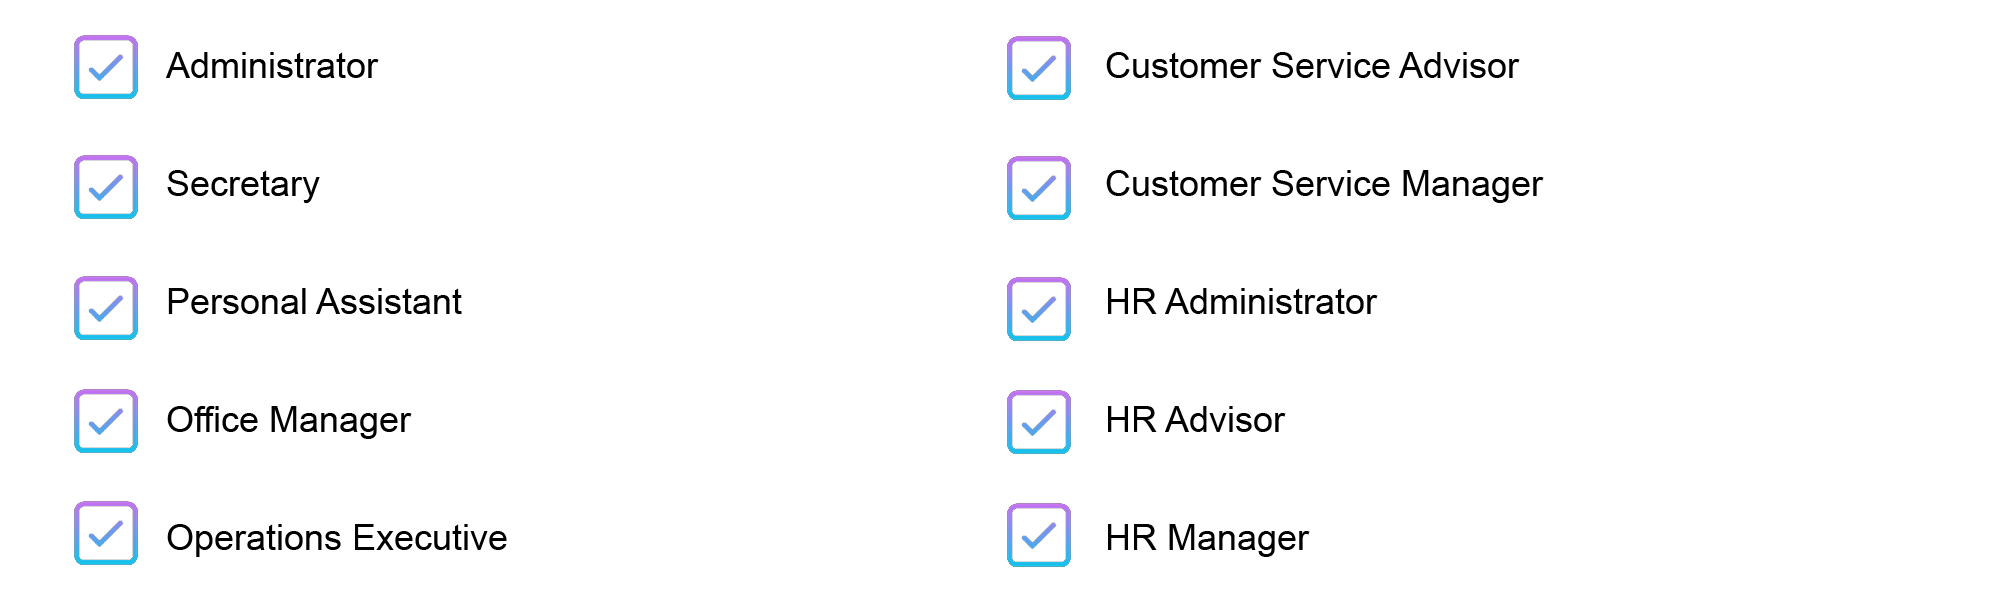 list of business support roles including administrator, secretary, personal assistant, office manager, operations executive, customer service advisor, customer service manager, HR administrator, HR advisor, HR manager